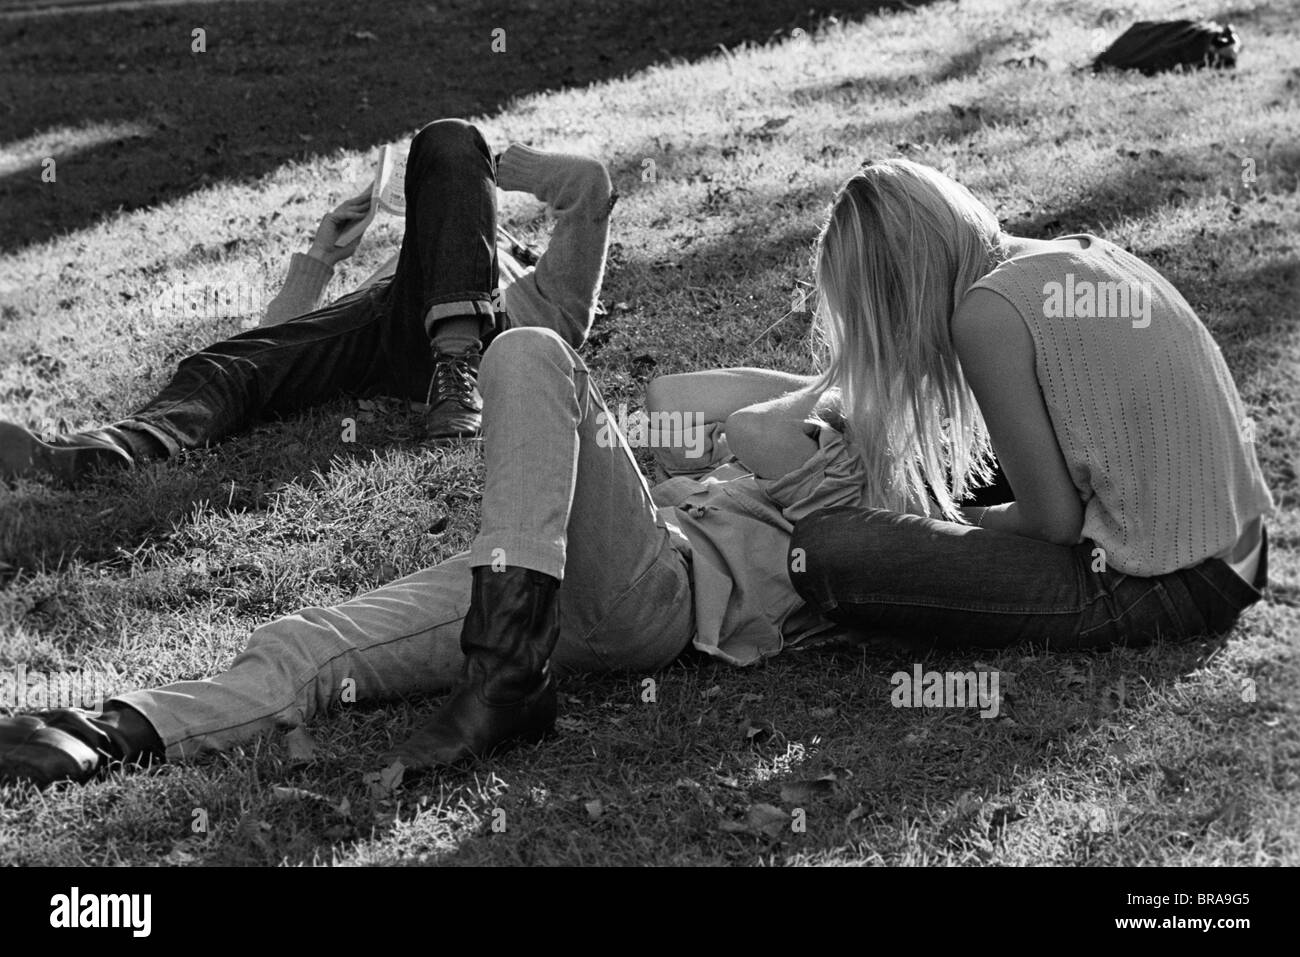 1960s 1970s HIPPIE COUPLE WOMAN WITH LONG BLONDE HAIR SIT BESIDE MAN LYING IN GRASS Stock Photo